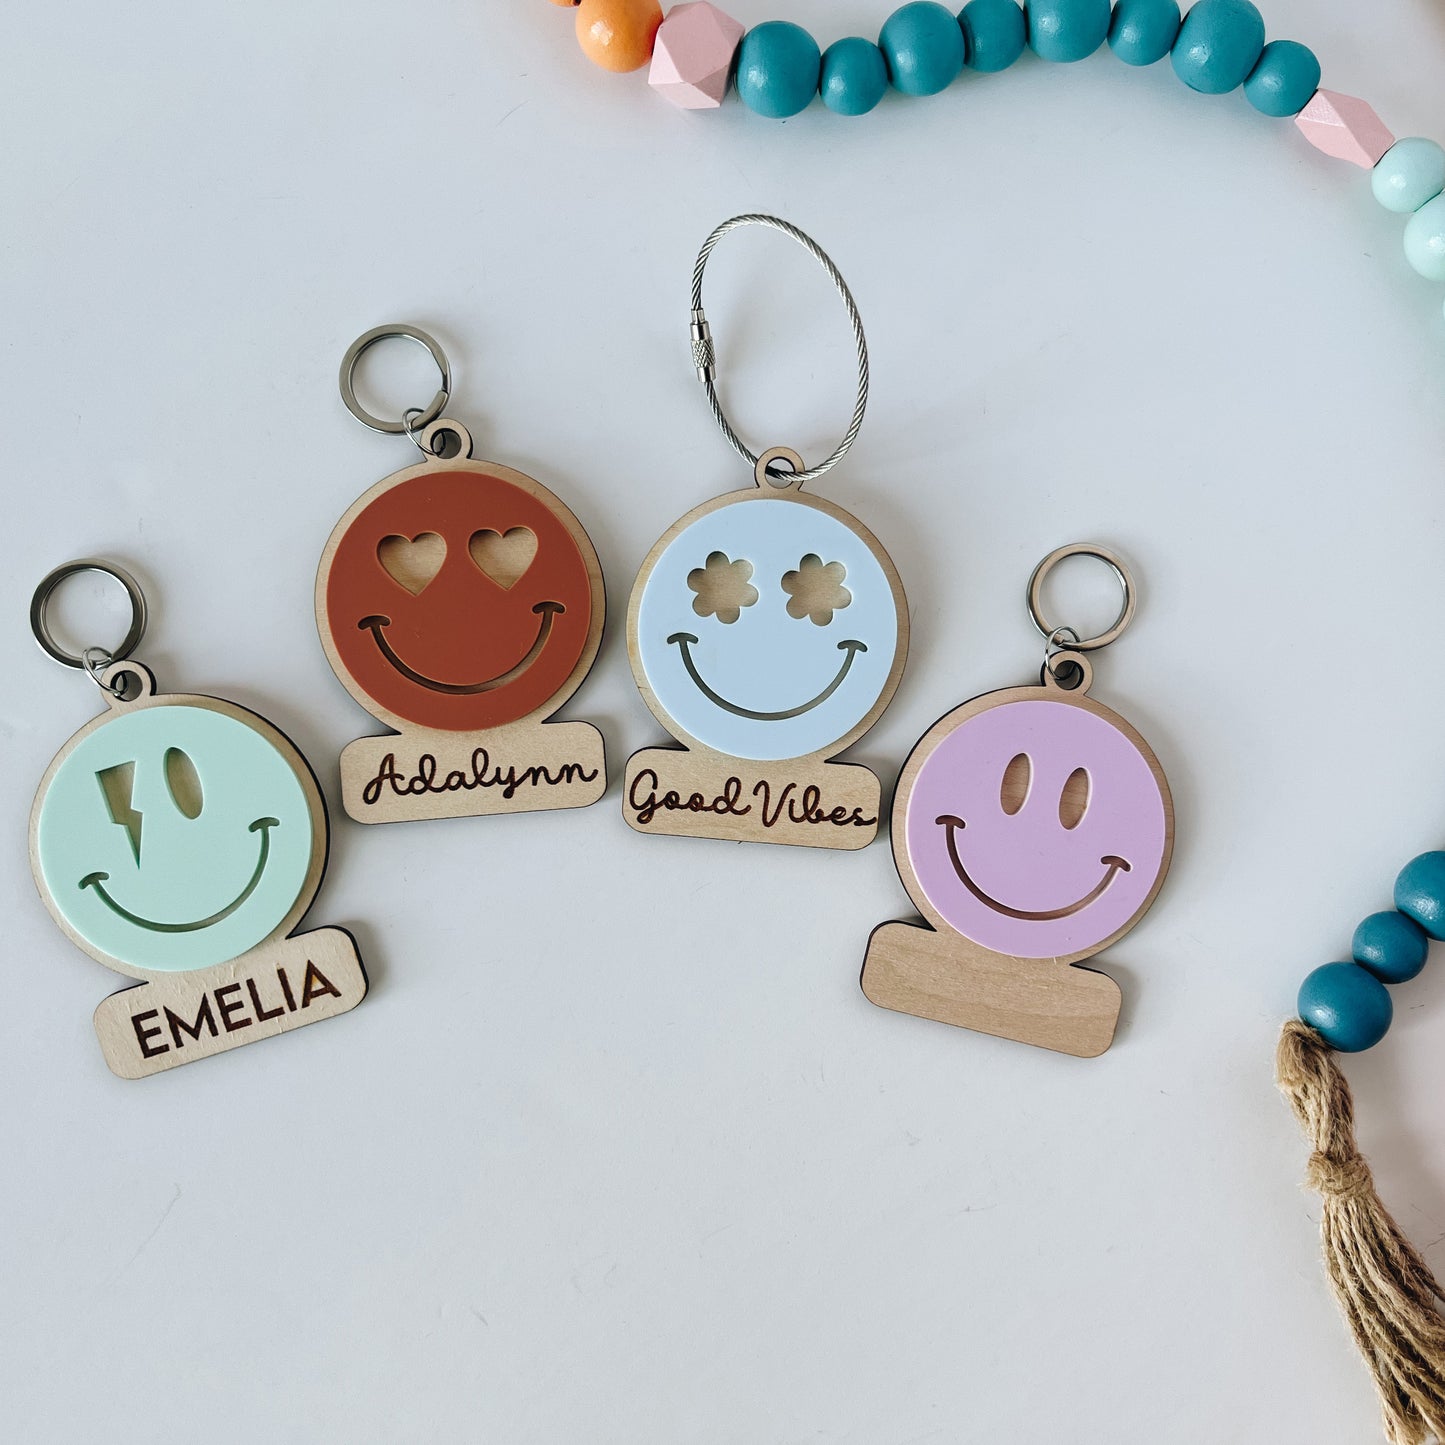 Customizable Retro Smiley Face Keychains or Backpack Tags (Set of 5)